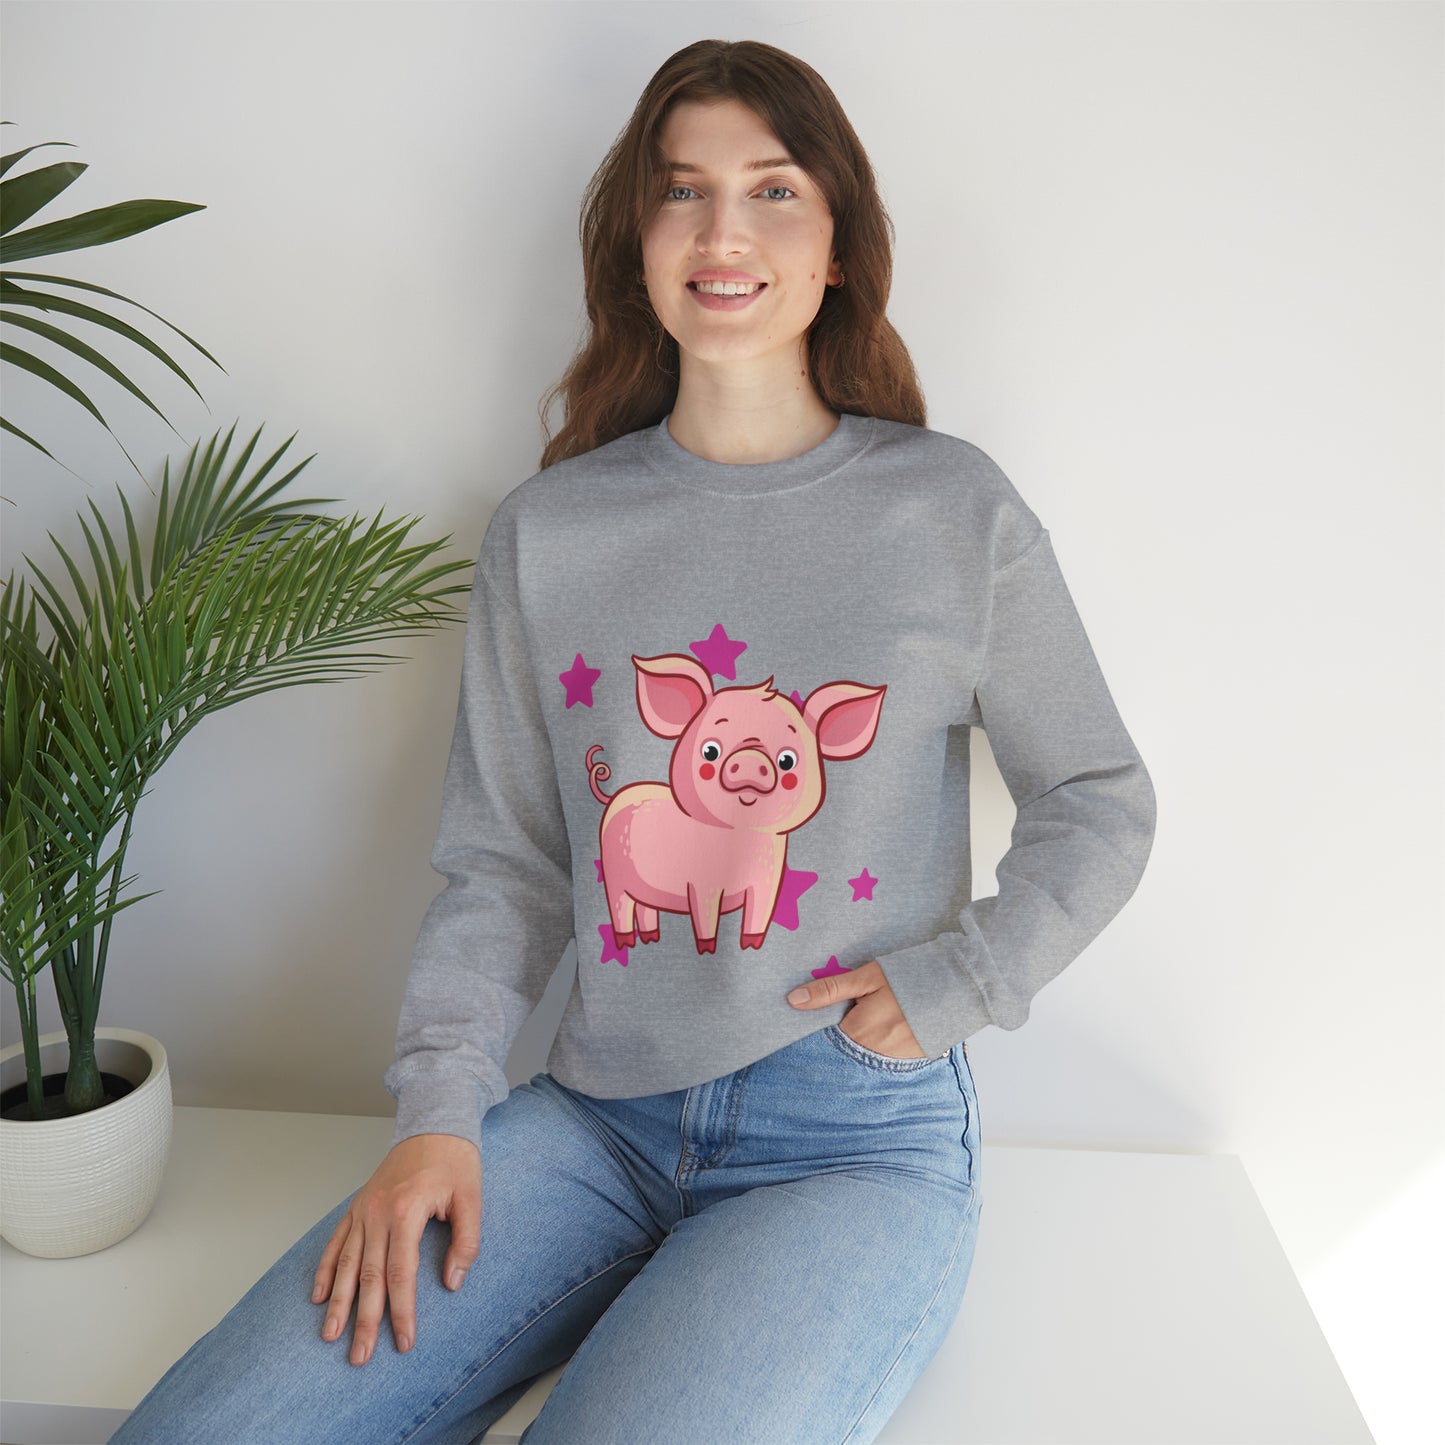 Brighten up your day with this star studded piggy design! Give the gift of this Unisex Heavy Blend™ Crewneck Sweatshirt or get one for yourself.